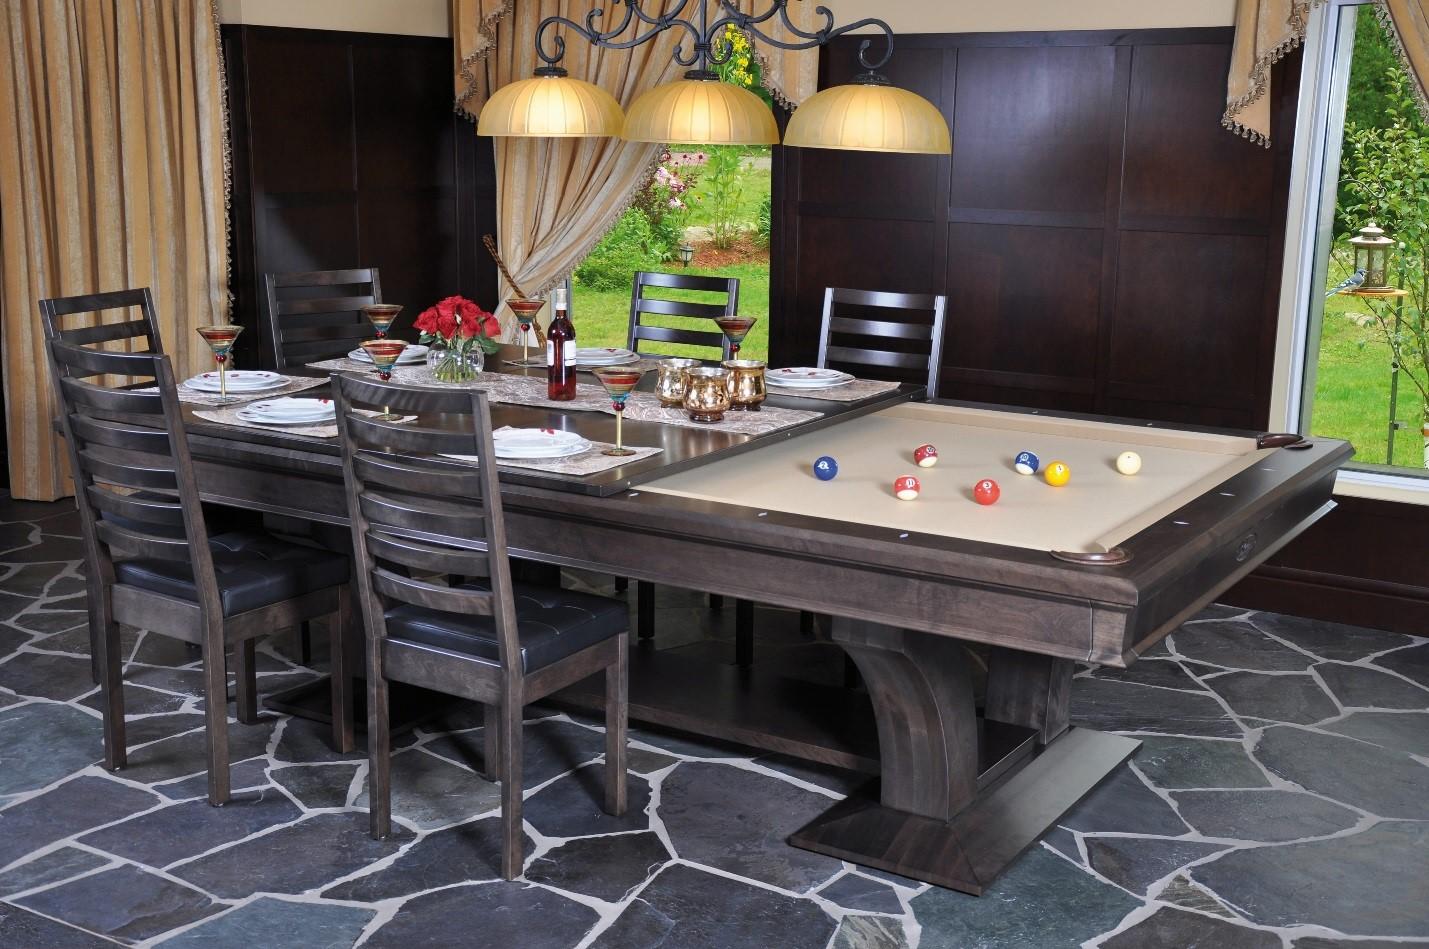 Pool Table As A Dining Room Table